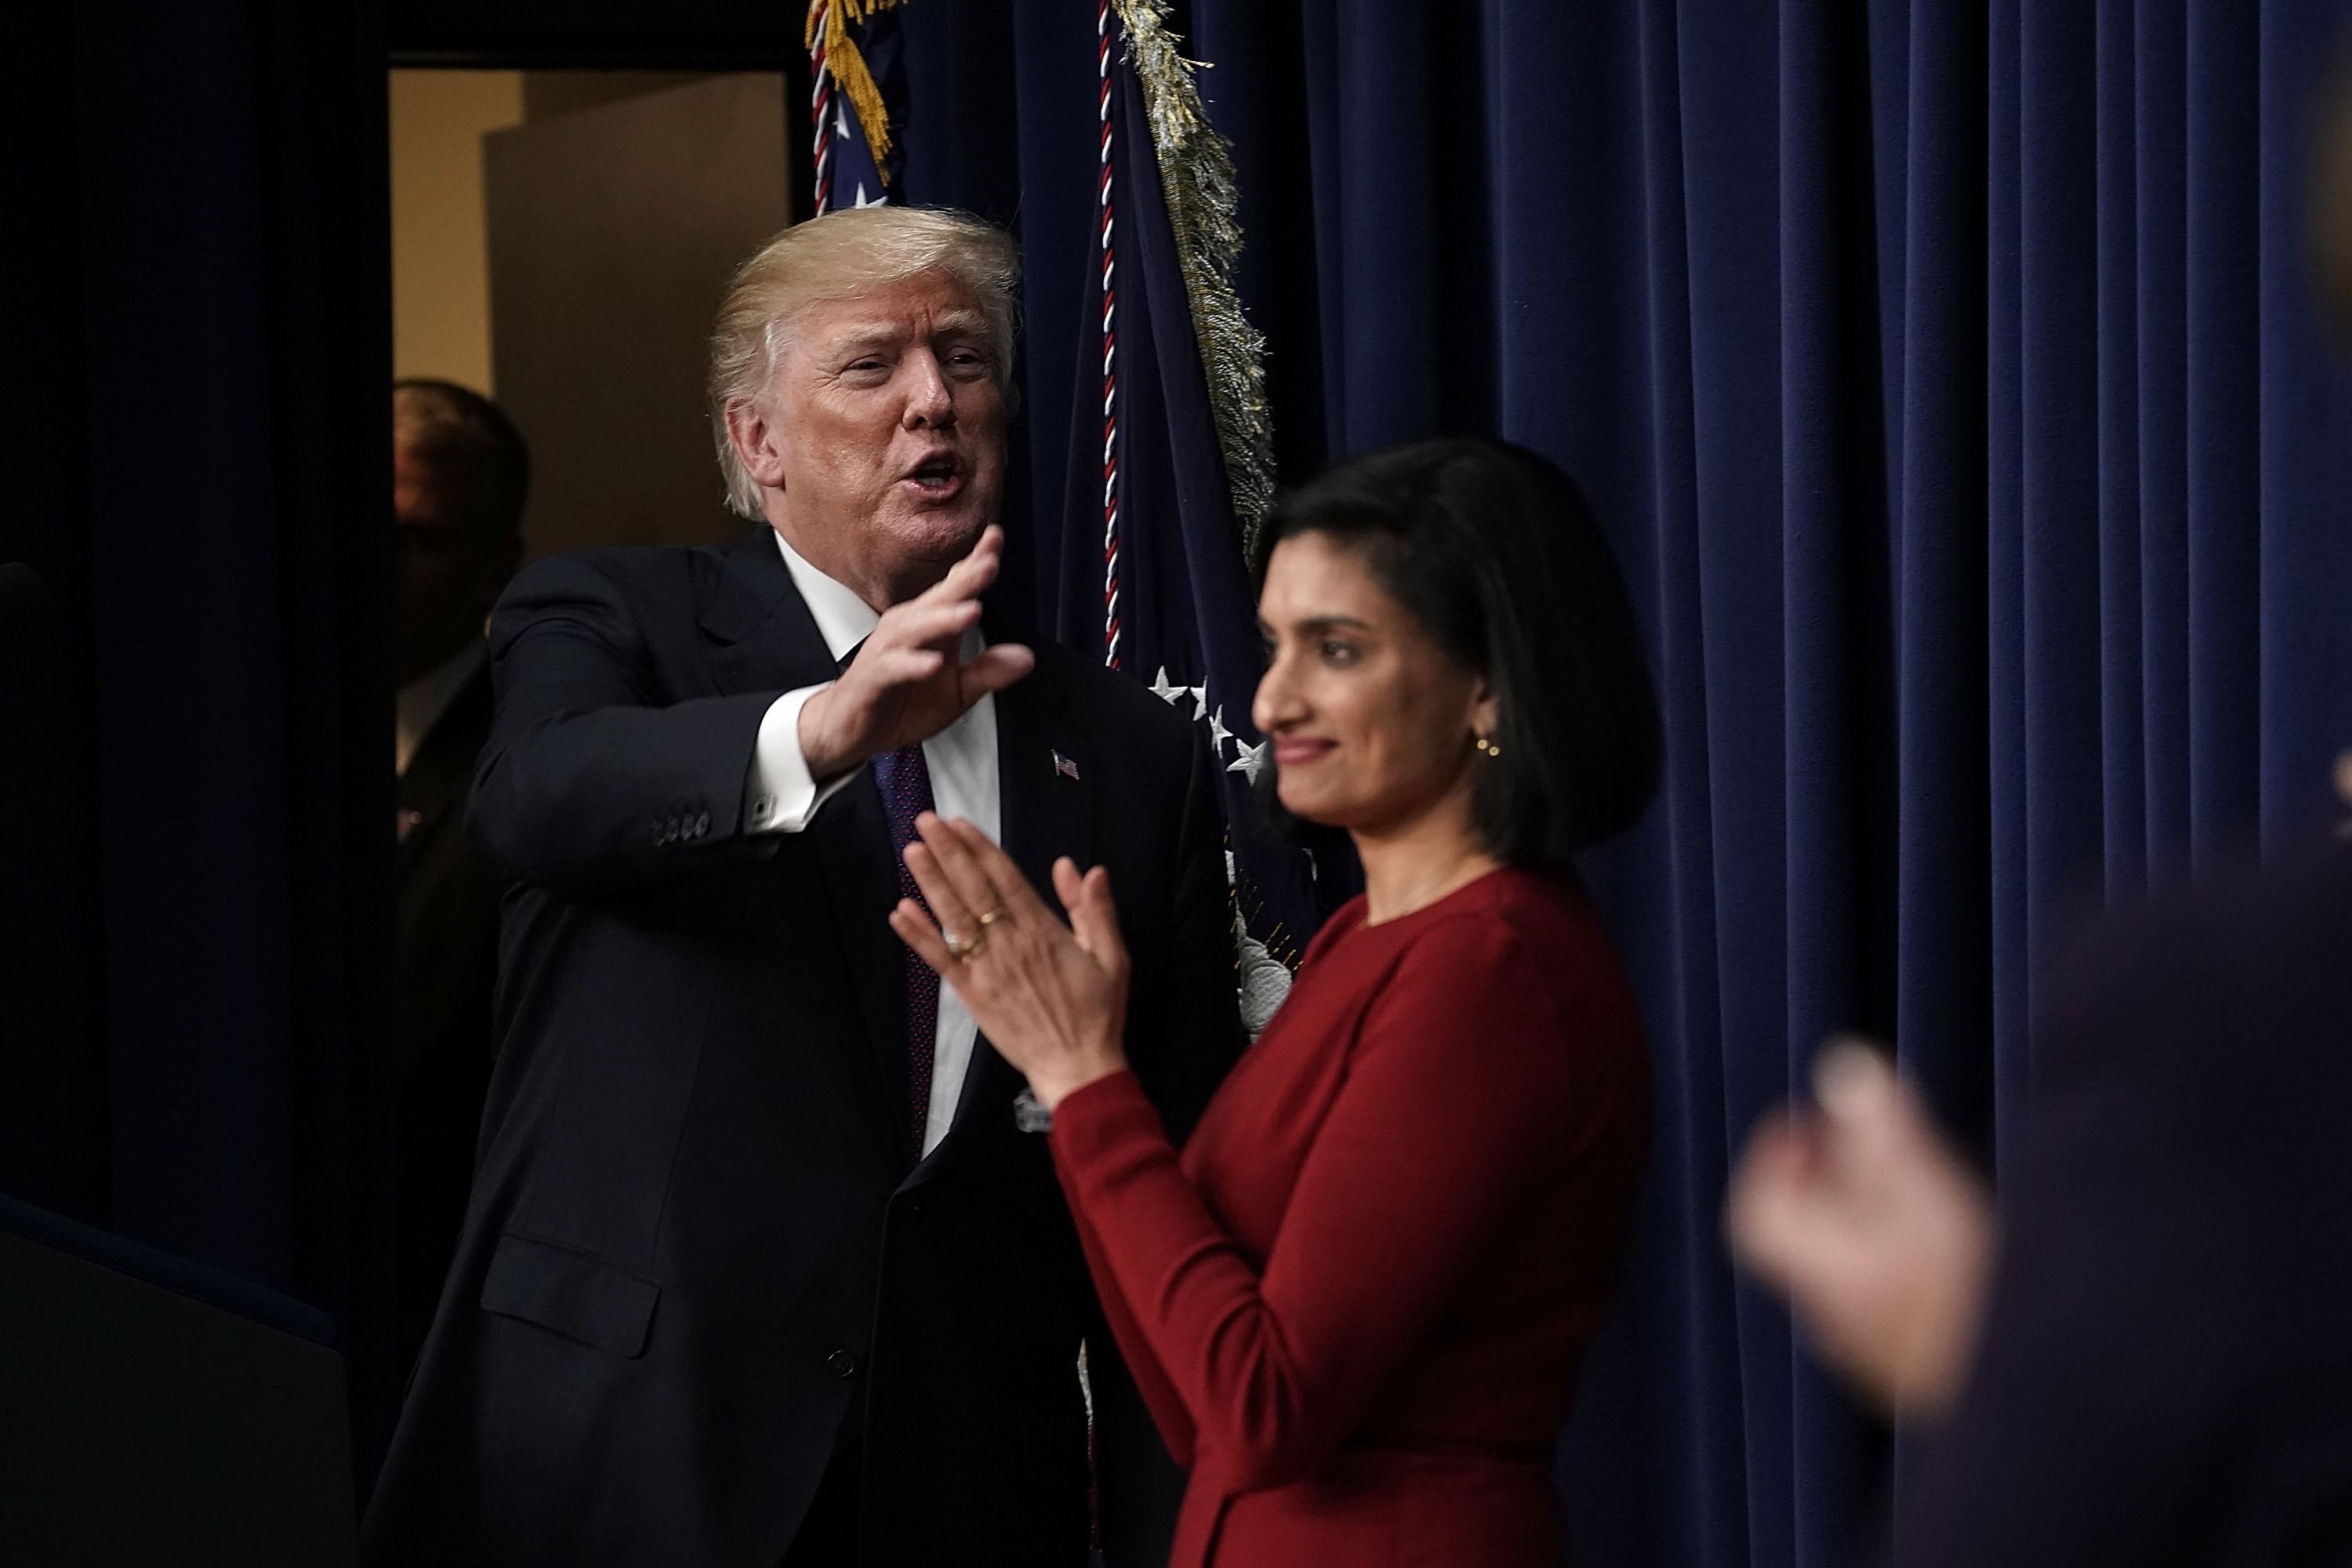 WASHINGTON, DC - JANUARY 16:  U.S. President Donald Trump (L) acknowledges the audience as Administrator of the Centers for Medicare and Medicaid Services Seema Verma (R) looks on as he stops by a Conversations with the Women of America panel at the South Court Auditorium of Eisenhower Executive Office Building January 18, 2018 in Washington, DC. The three-part panel features ÒAmerican women from various backgrounds and experiences who will speak with high-level women within the Trump Administration, about what has been accomplished to date to advance women at home, and in the workplace.Ó (Photo by Alex Wong/Getty Images)